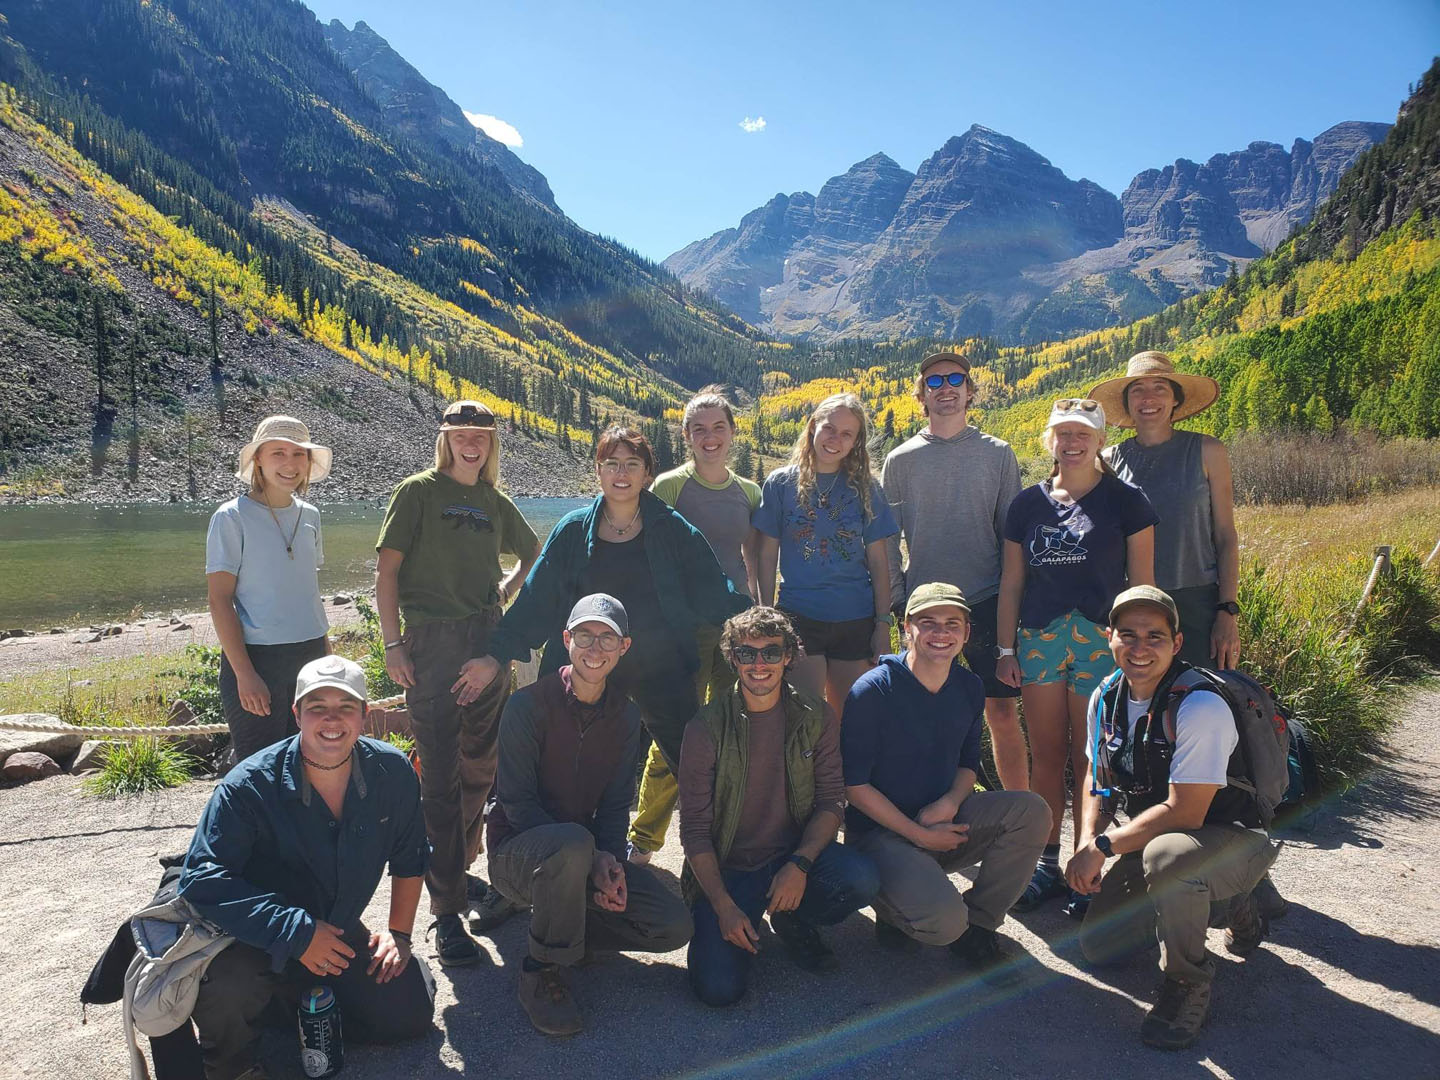 CC students who participated in TREE Semester 2022 are pictured in the Maroon Bells after observing field programing from the Aspen Center for Environmental Studies. Photo submitted by Connor Nolan ’20, M’21.